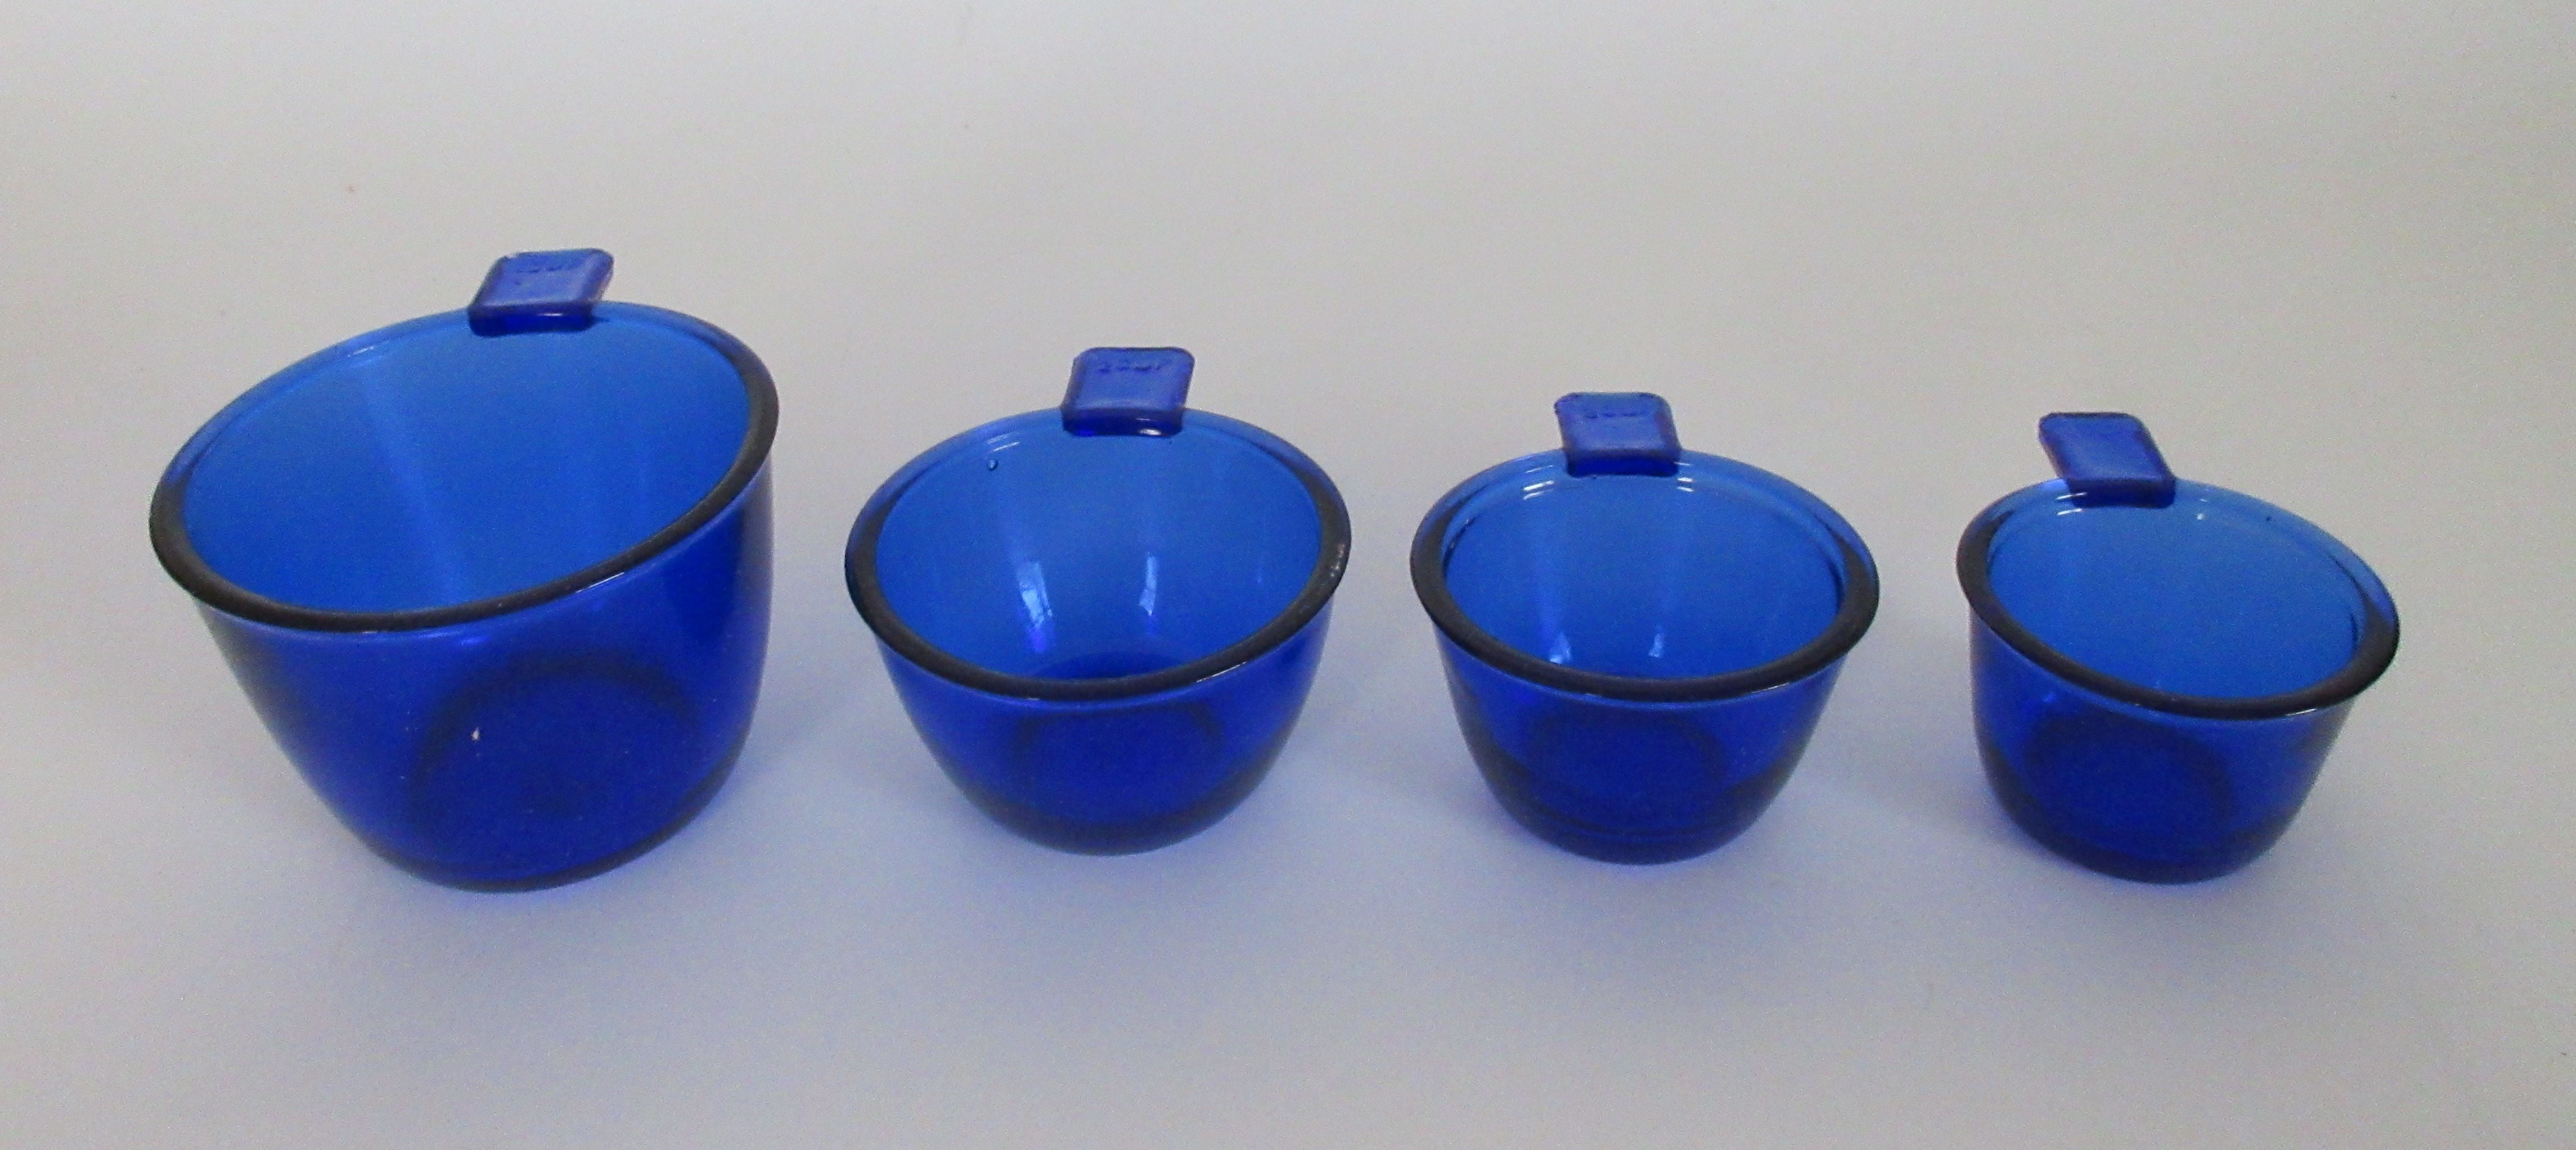 Depression Style Blue Glass Nesting Measuring Cups Set of 4 Vintage style Retro 